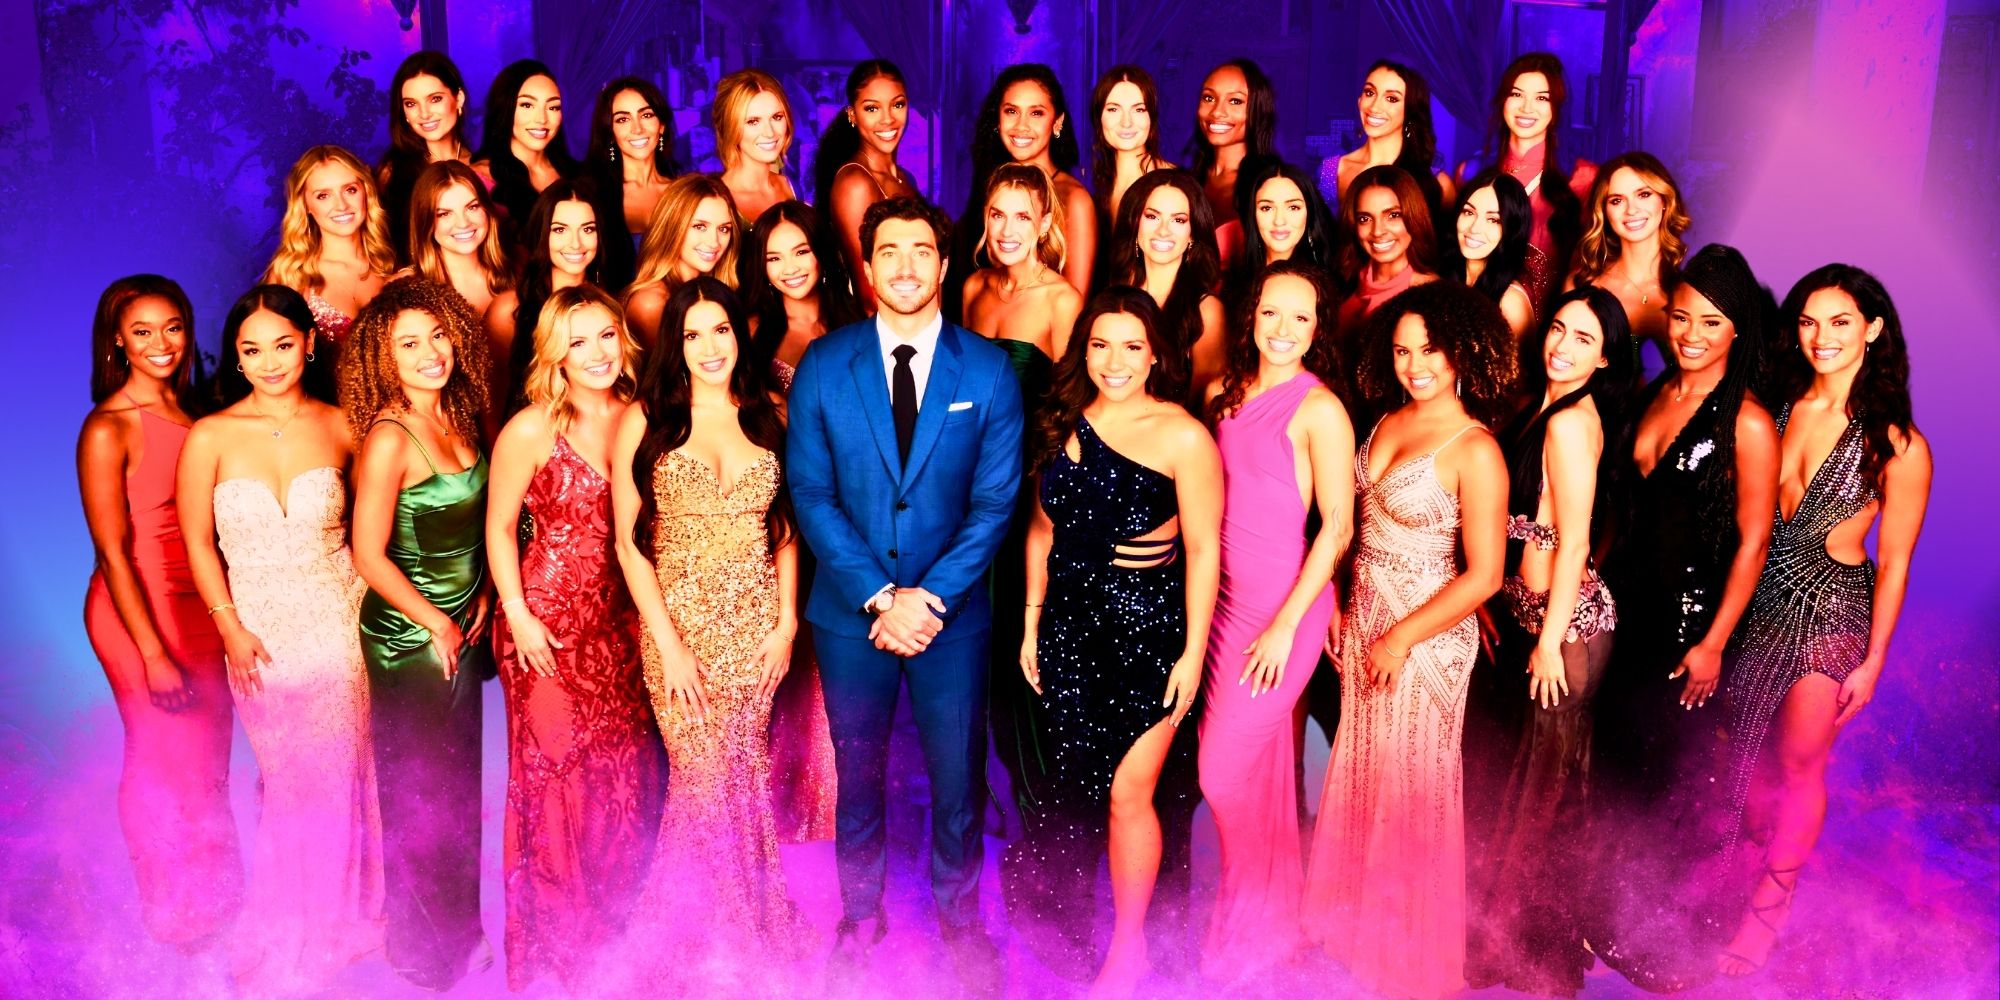 Does The Bachelor Season 28 Star Joey Graziadei’s Cast Have More Women Than Usual? (Every Season Ranked)